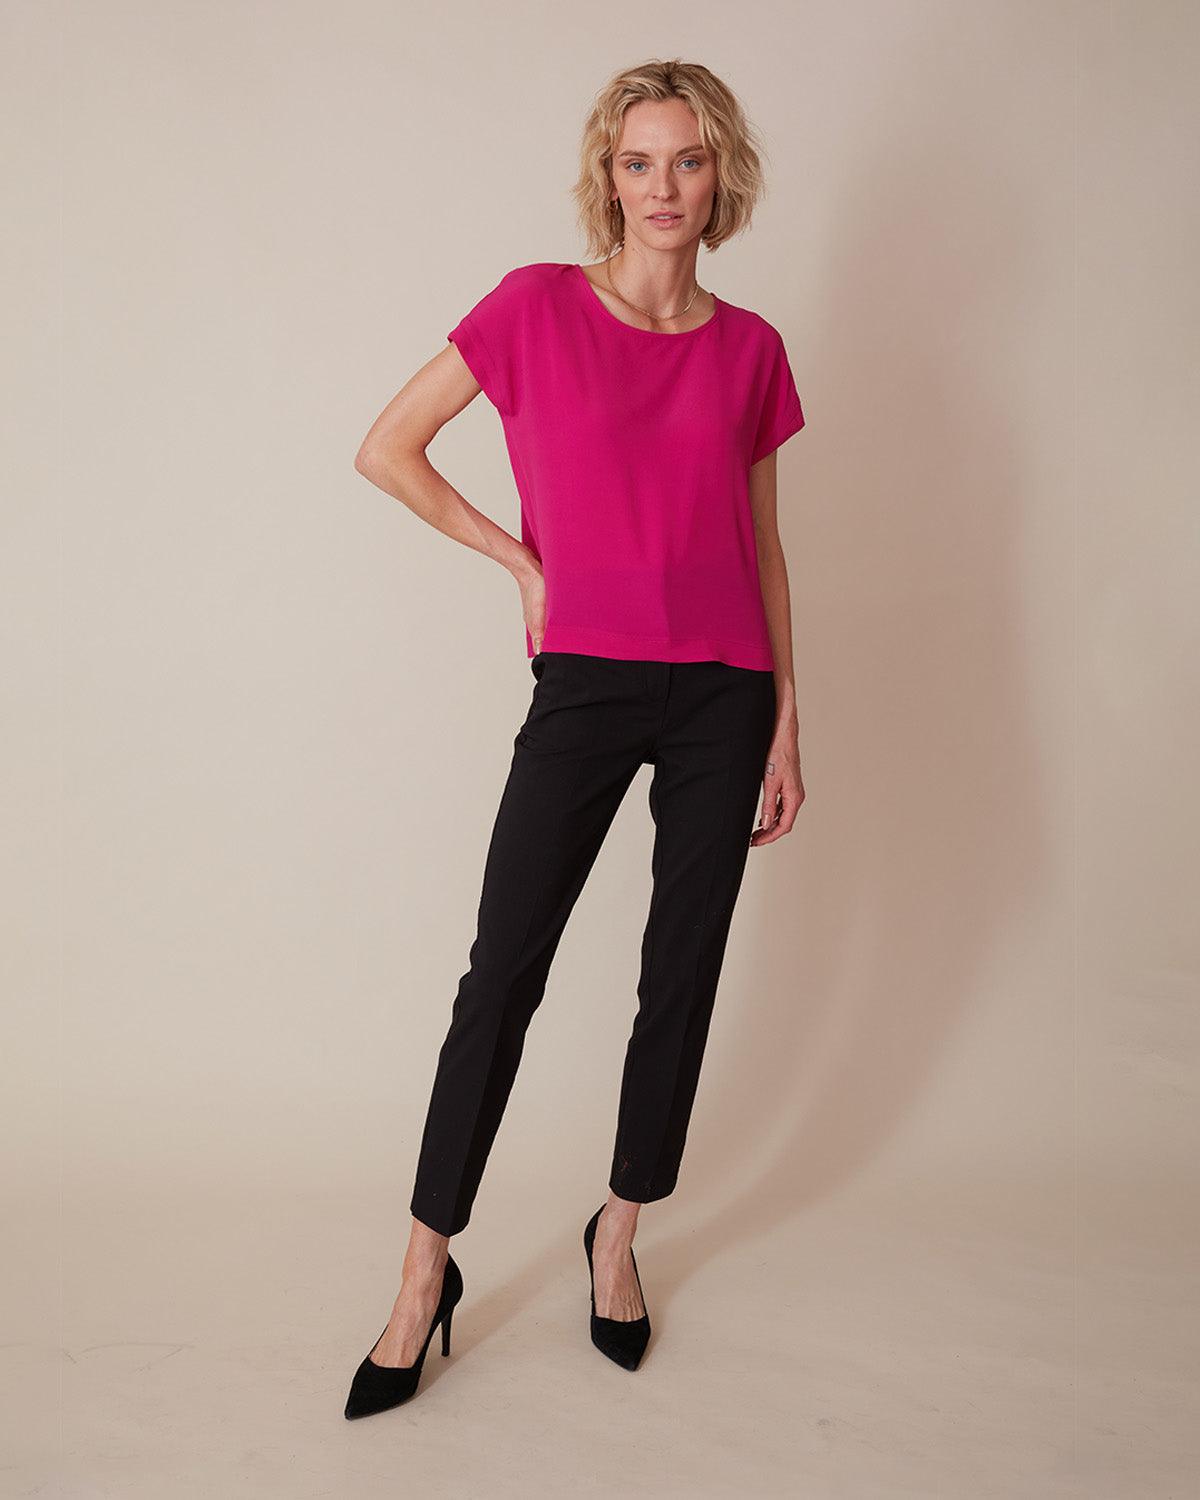 "#color_FUCHSIA|Elyse is 5'9", wearing a size XS